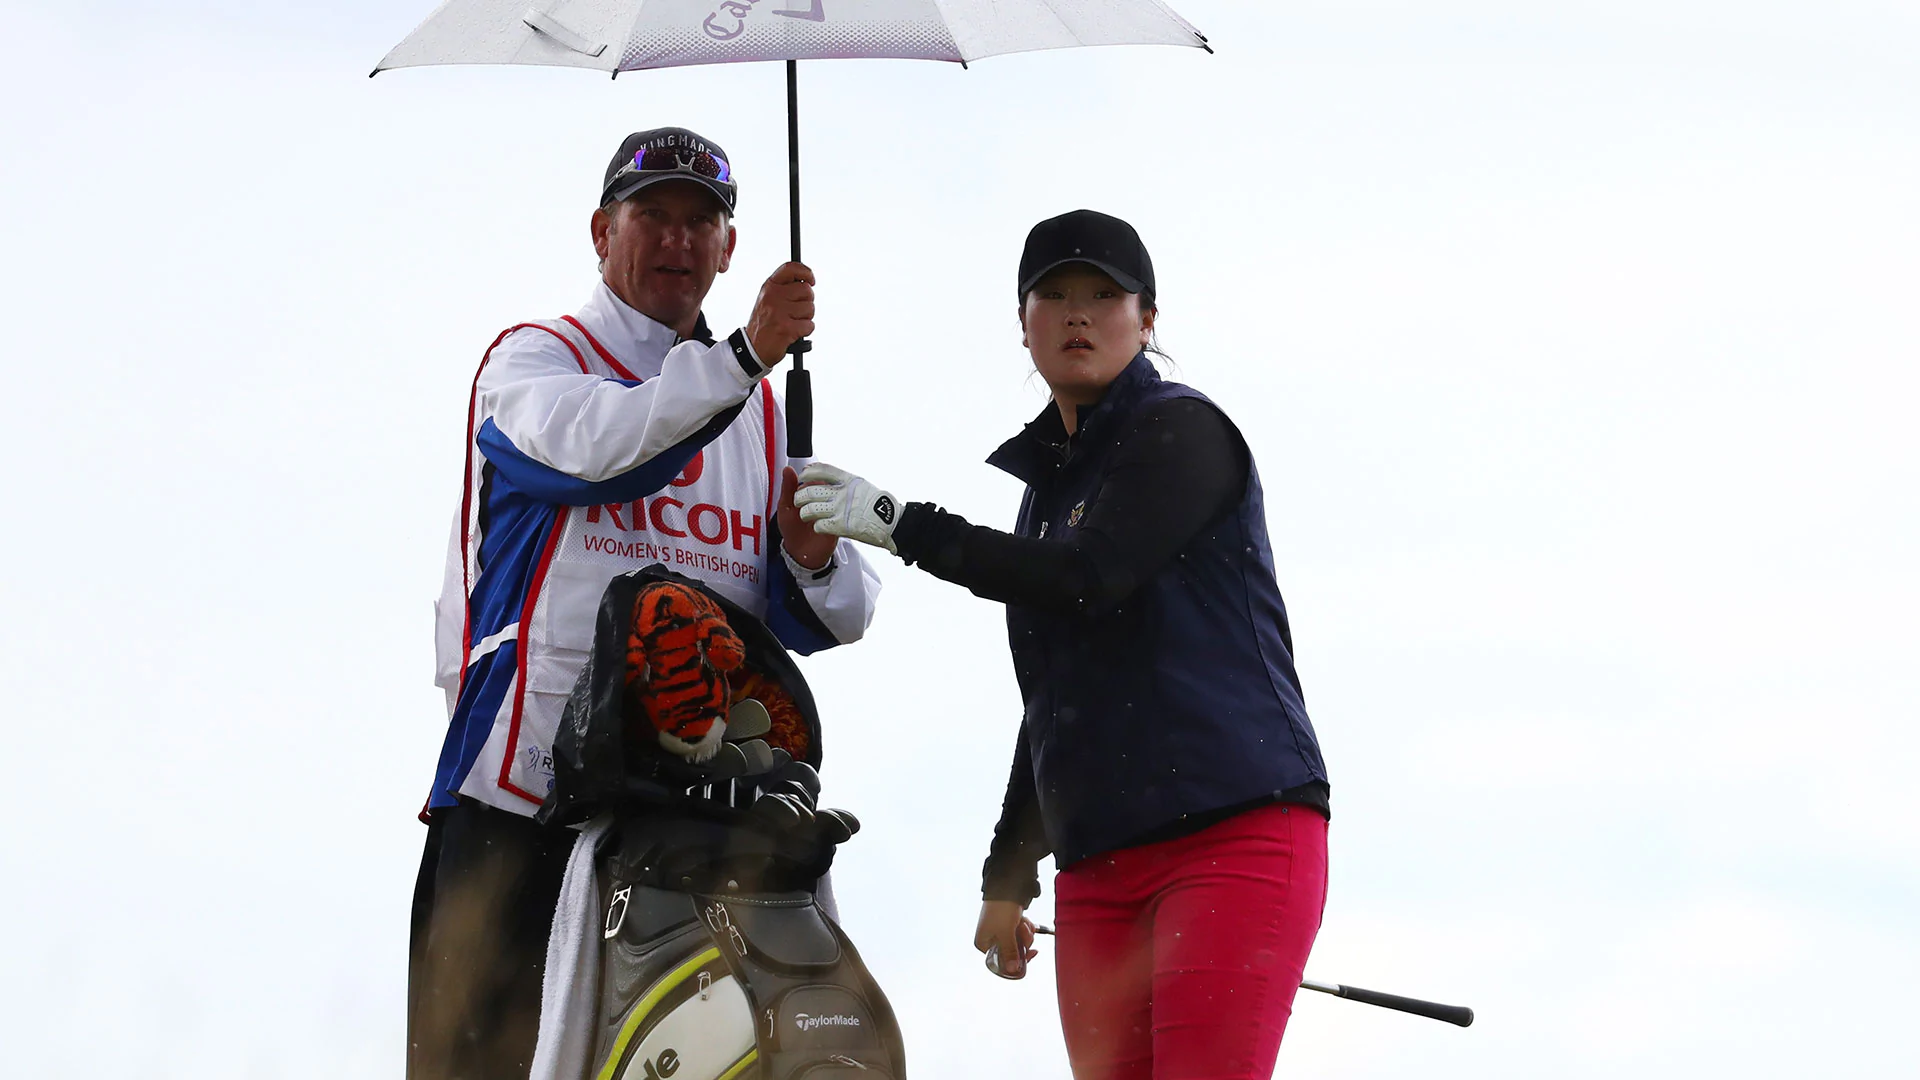 Yin plays her way into Solheim consideration